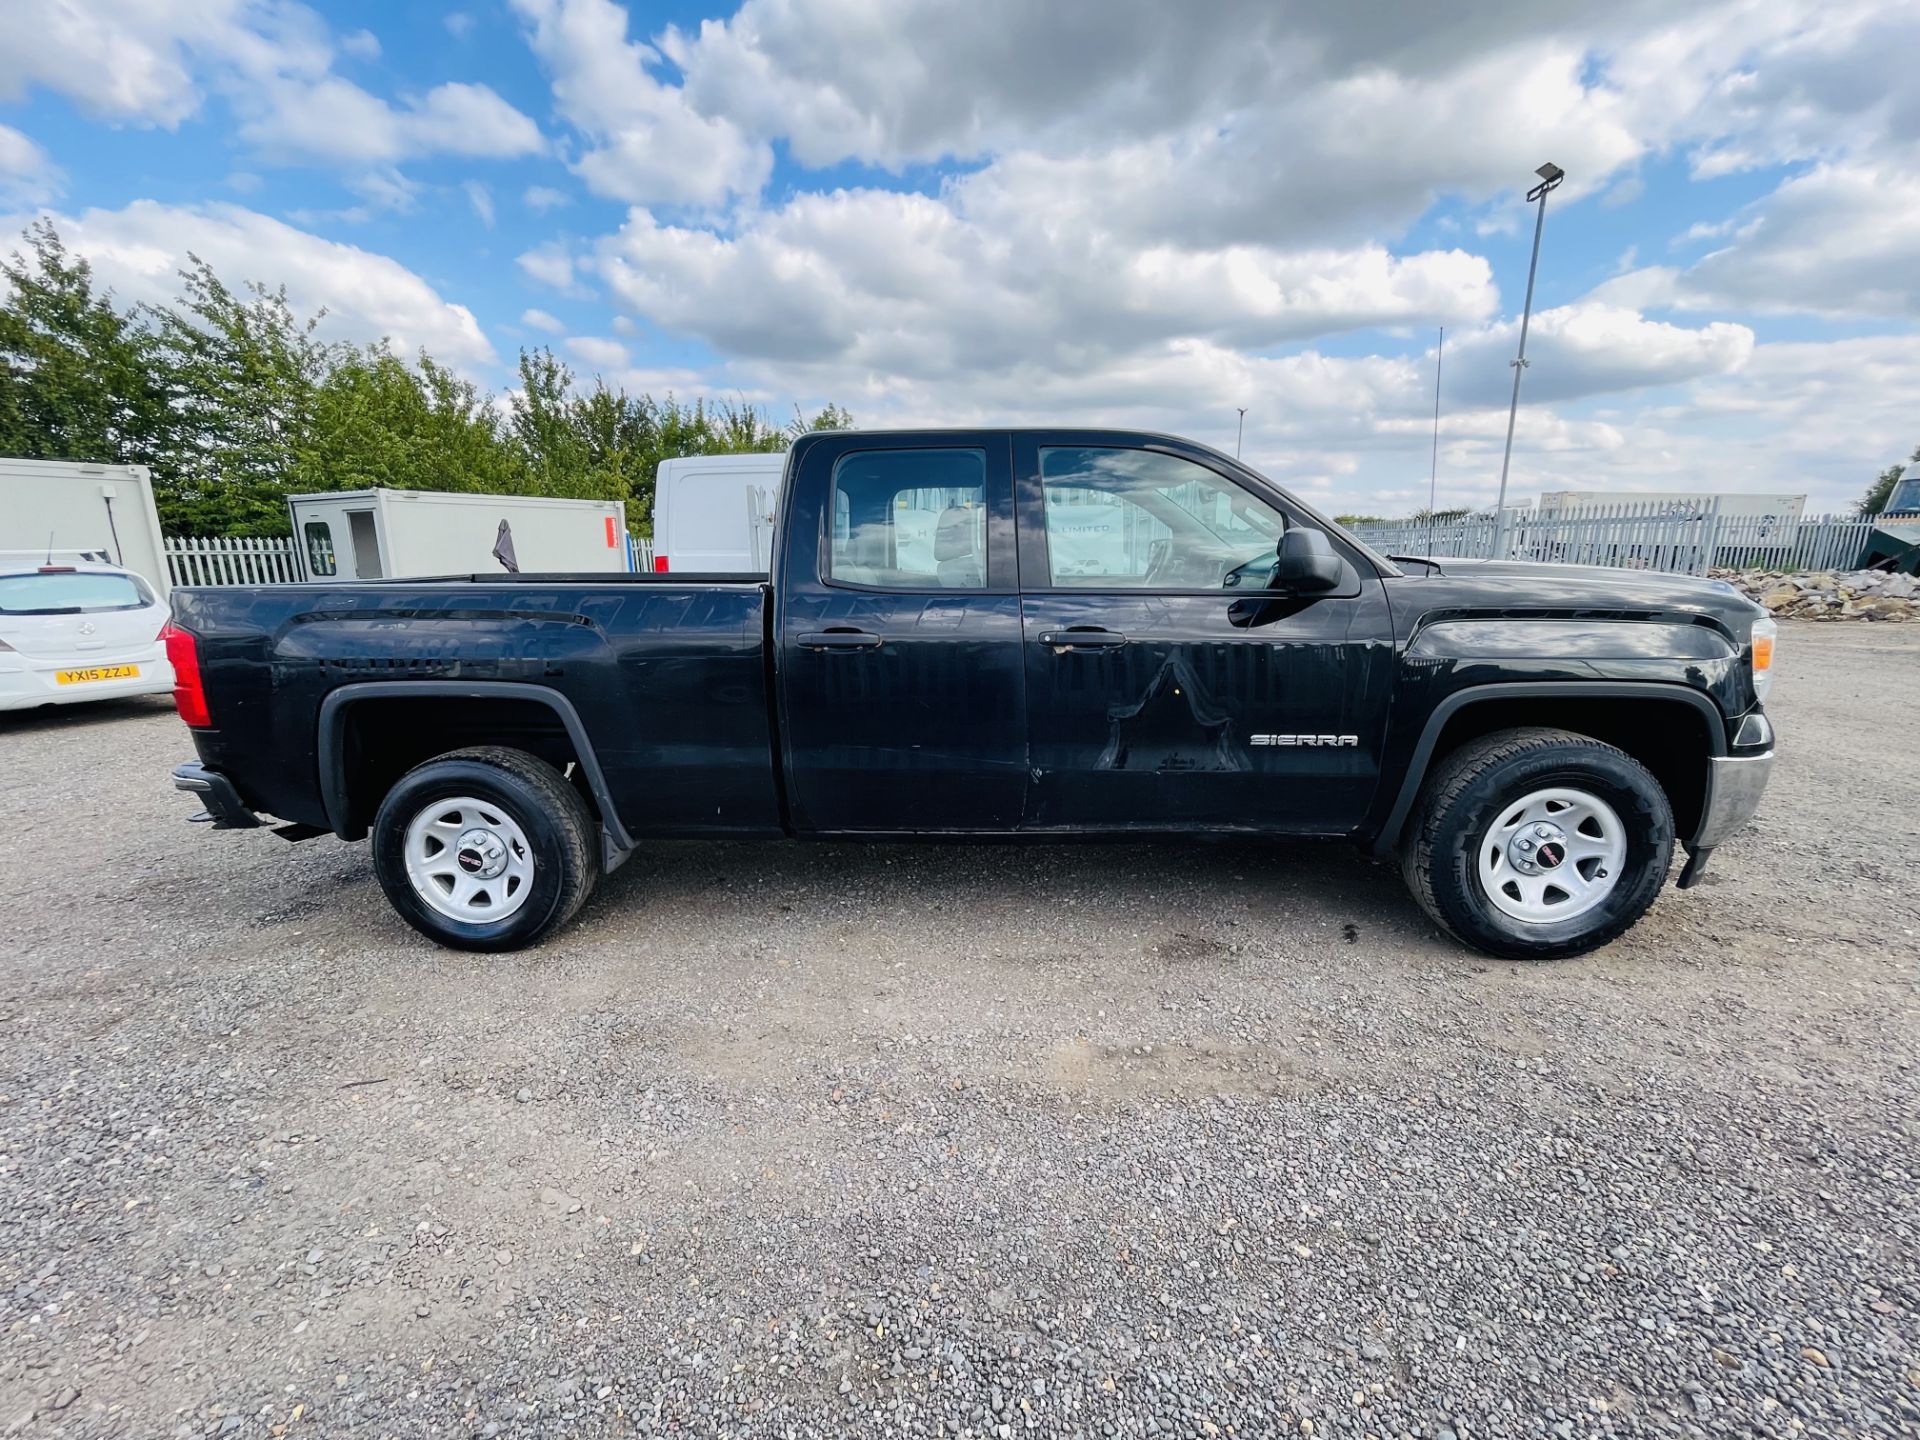 ** ON SALE ** GMC Sierra 4.3L V6 1500 Double-Cab 2014 '2014 Year' 6 seats - Air Con - Pick-up - - Image 11 of 22